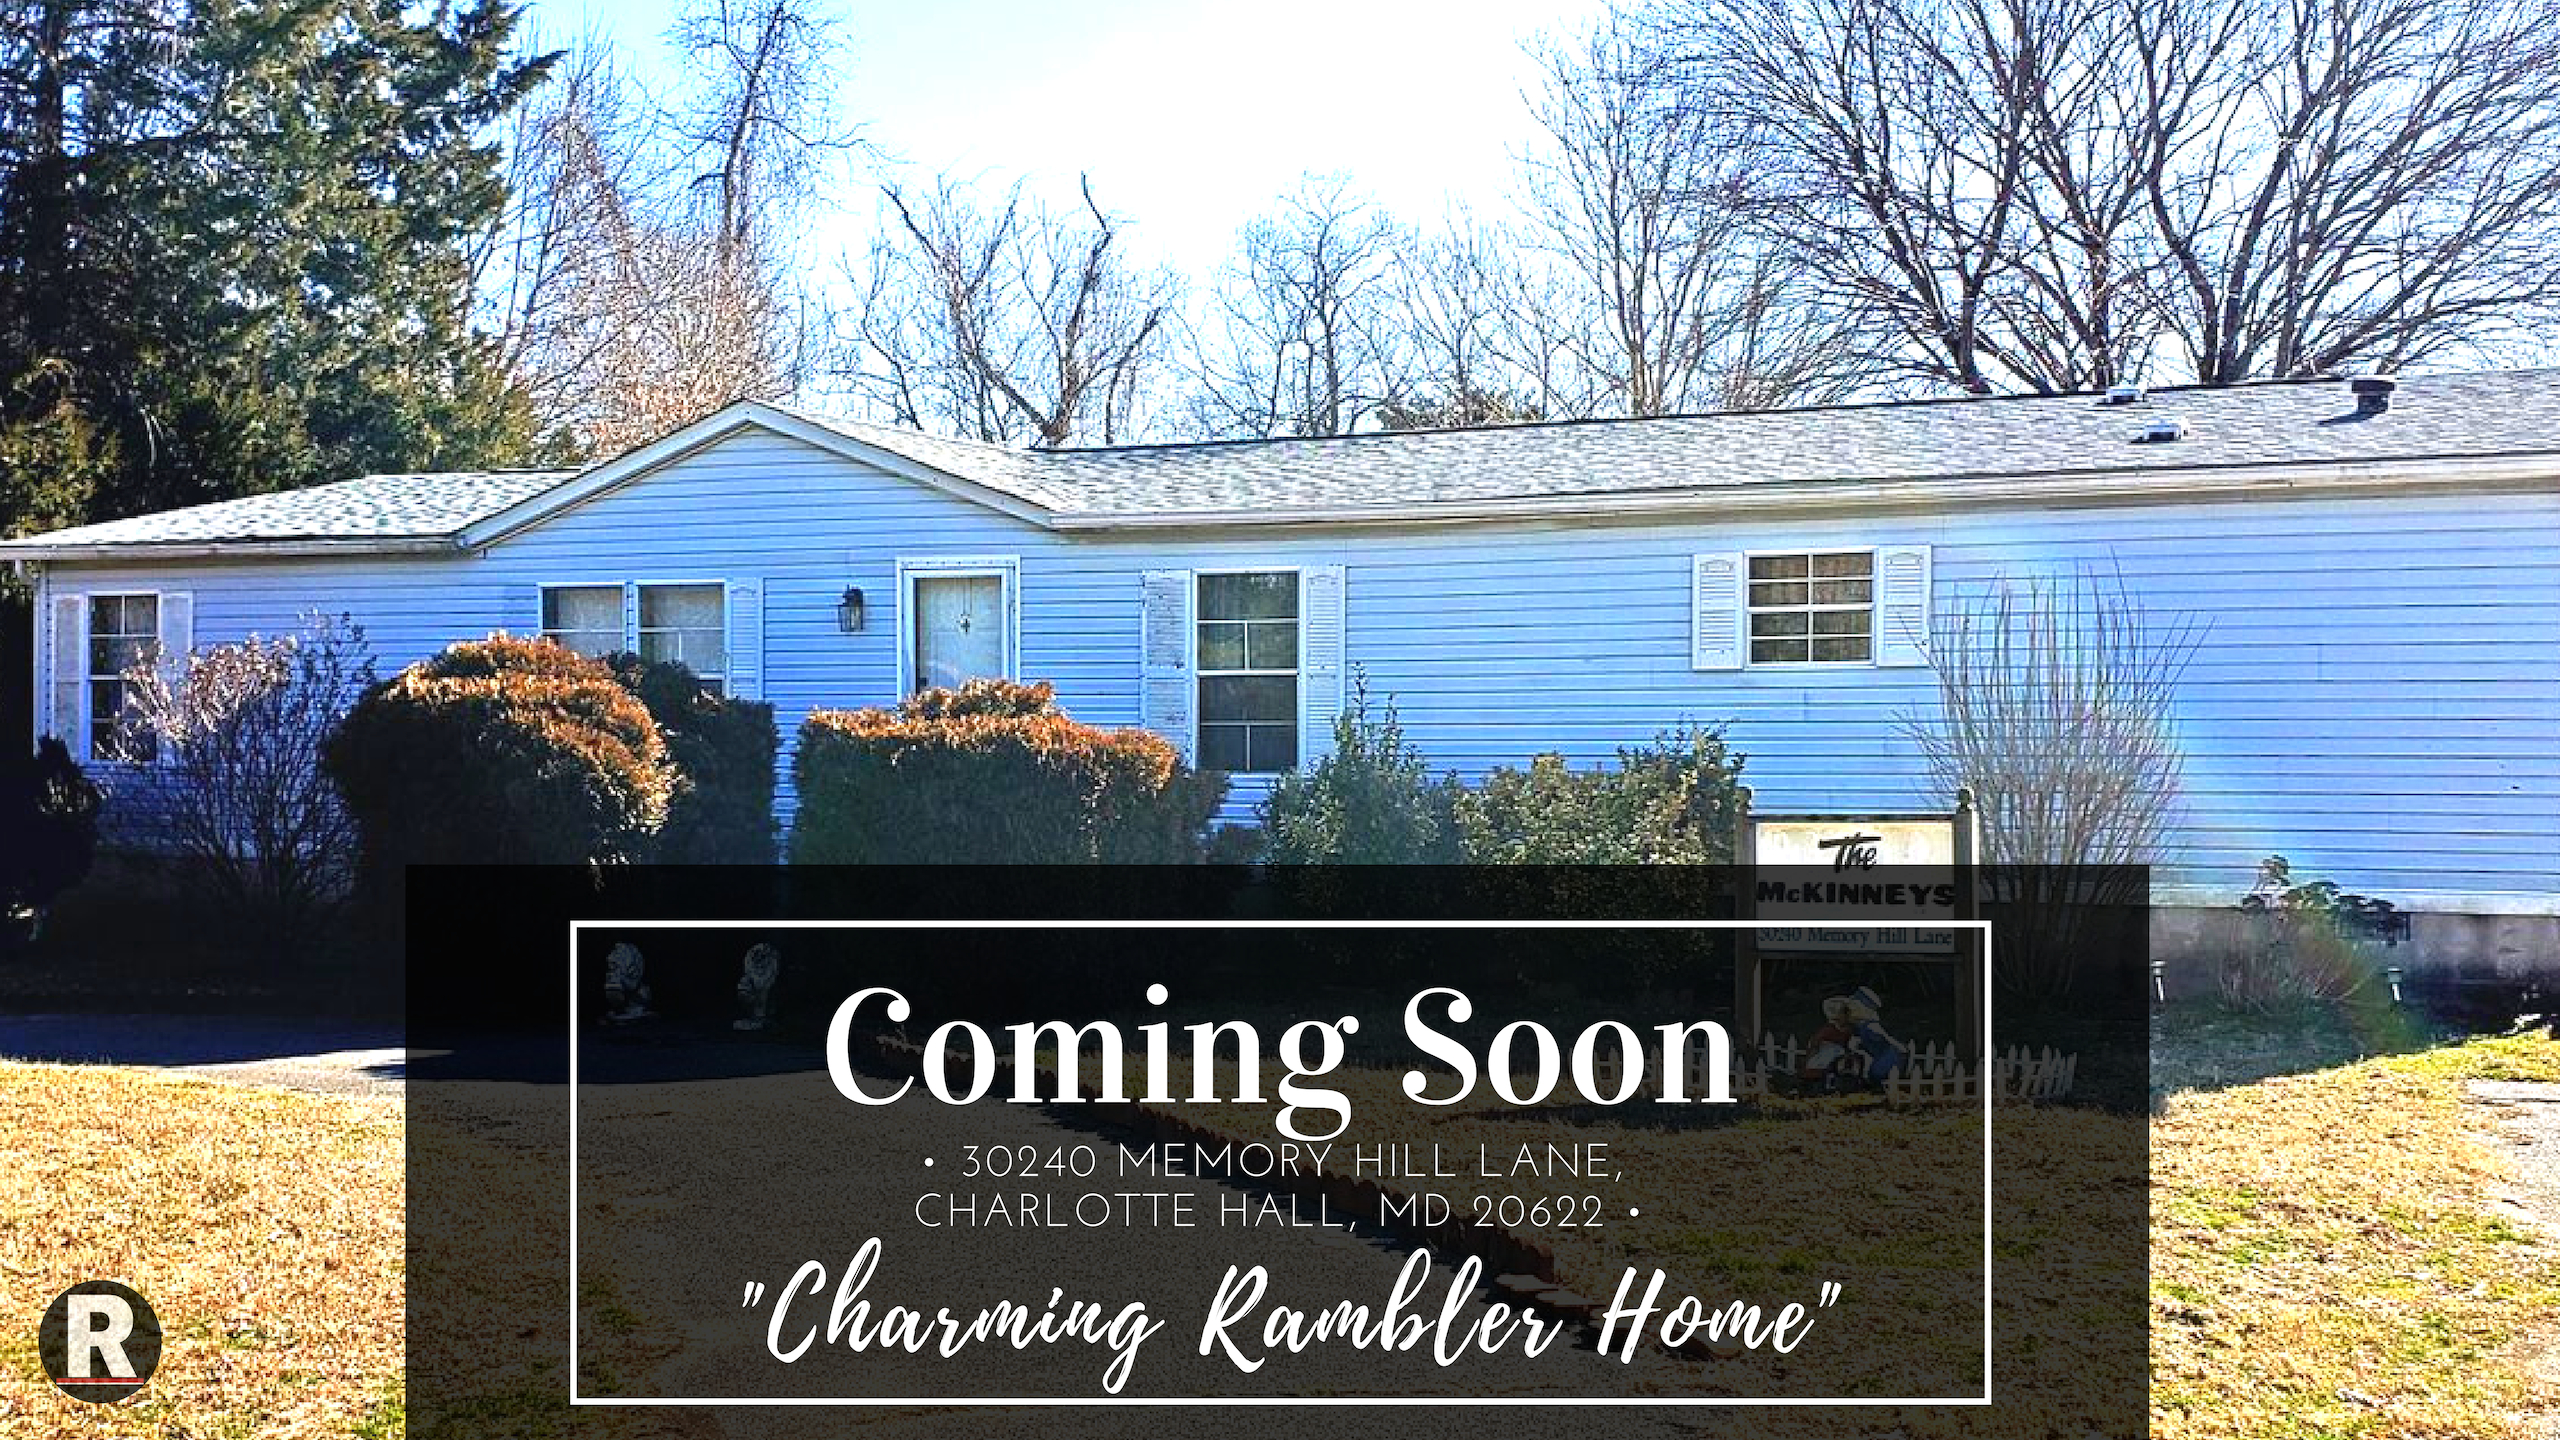 Coming Soon! 30240 Memory Hill Lane, Charlotte Hall, MD 20622